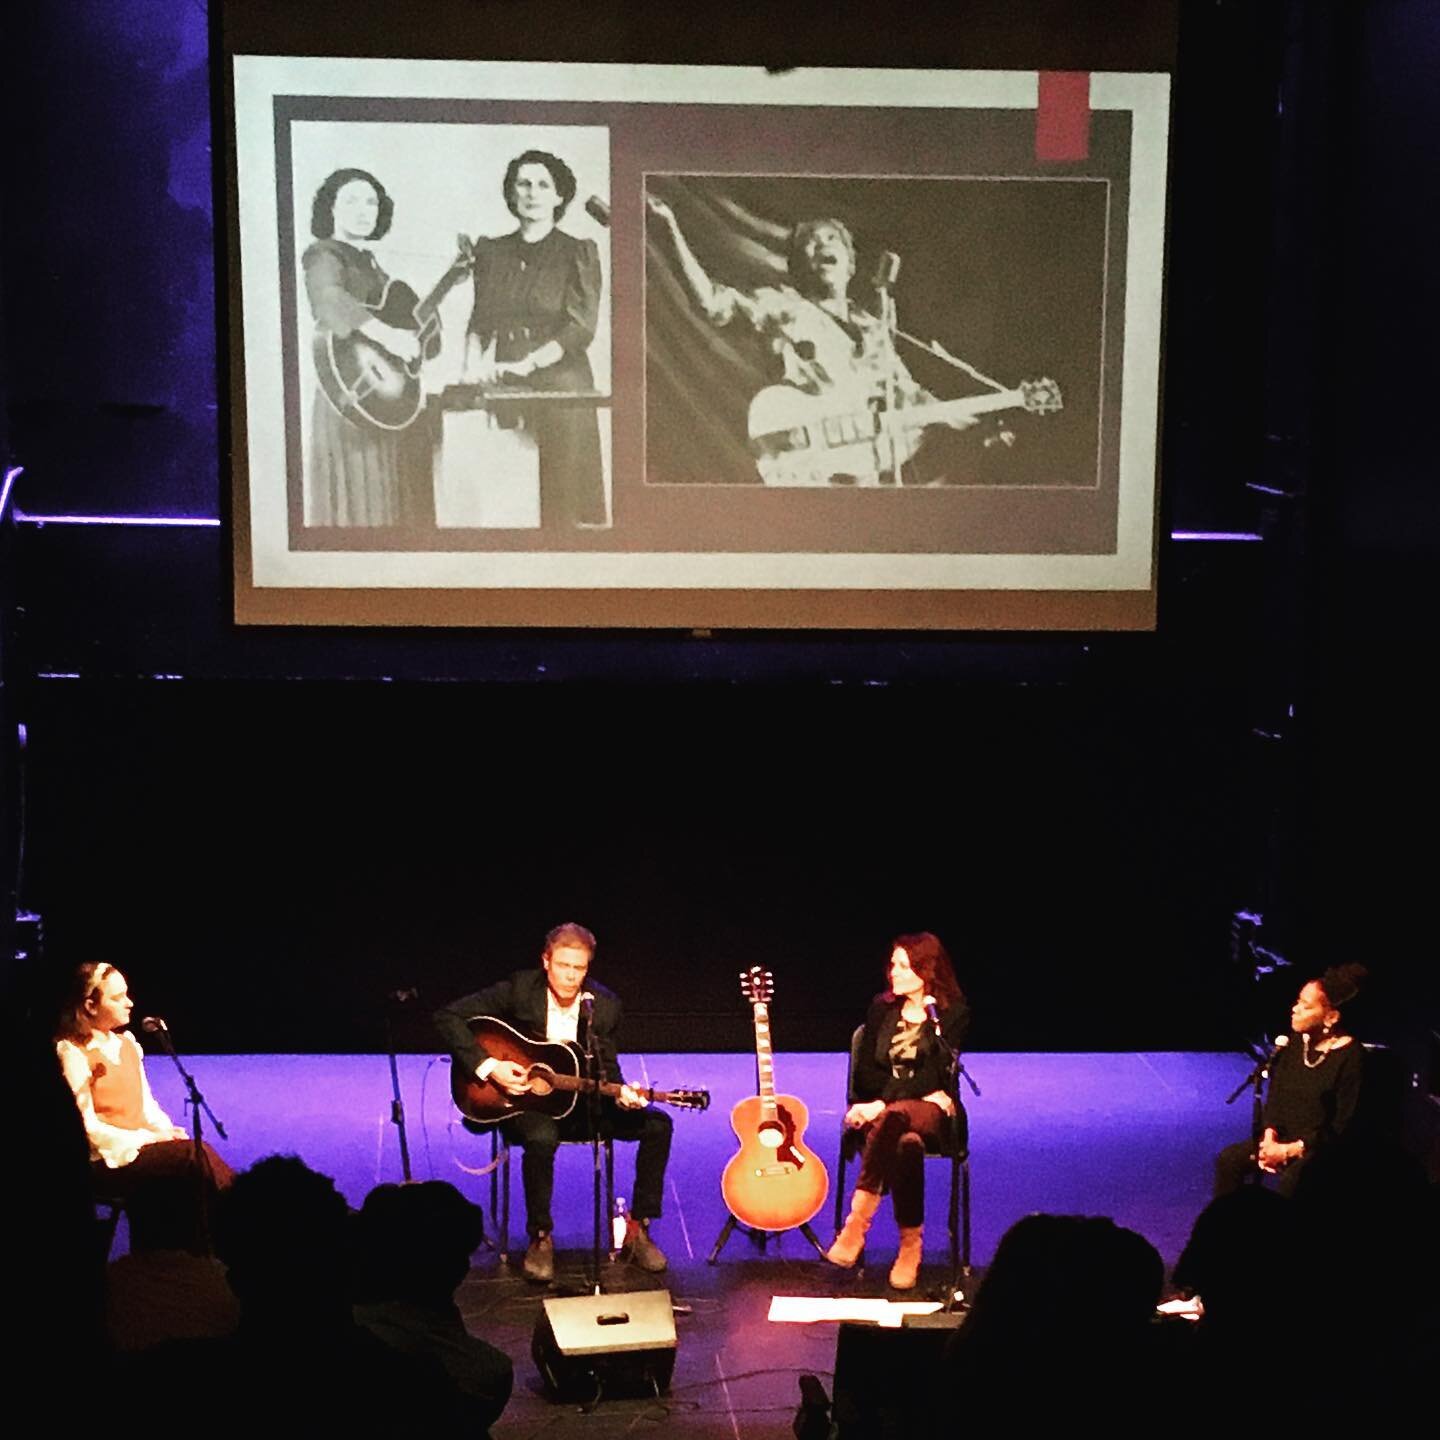 This is last week at @nyusteinhardt with @catherine_russell_vocalist, @joshritter and NYU songwriting student @gem.laurent. We created a show honoring matriarchs of roots music Sister Rosetta Tharpe and Sara and Maybelle Carter, and sang songs by the